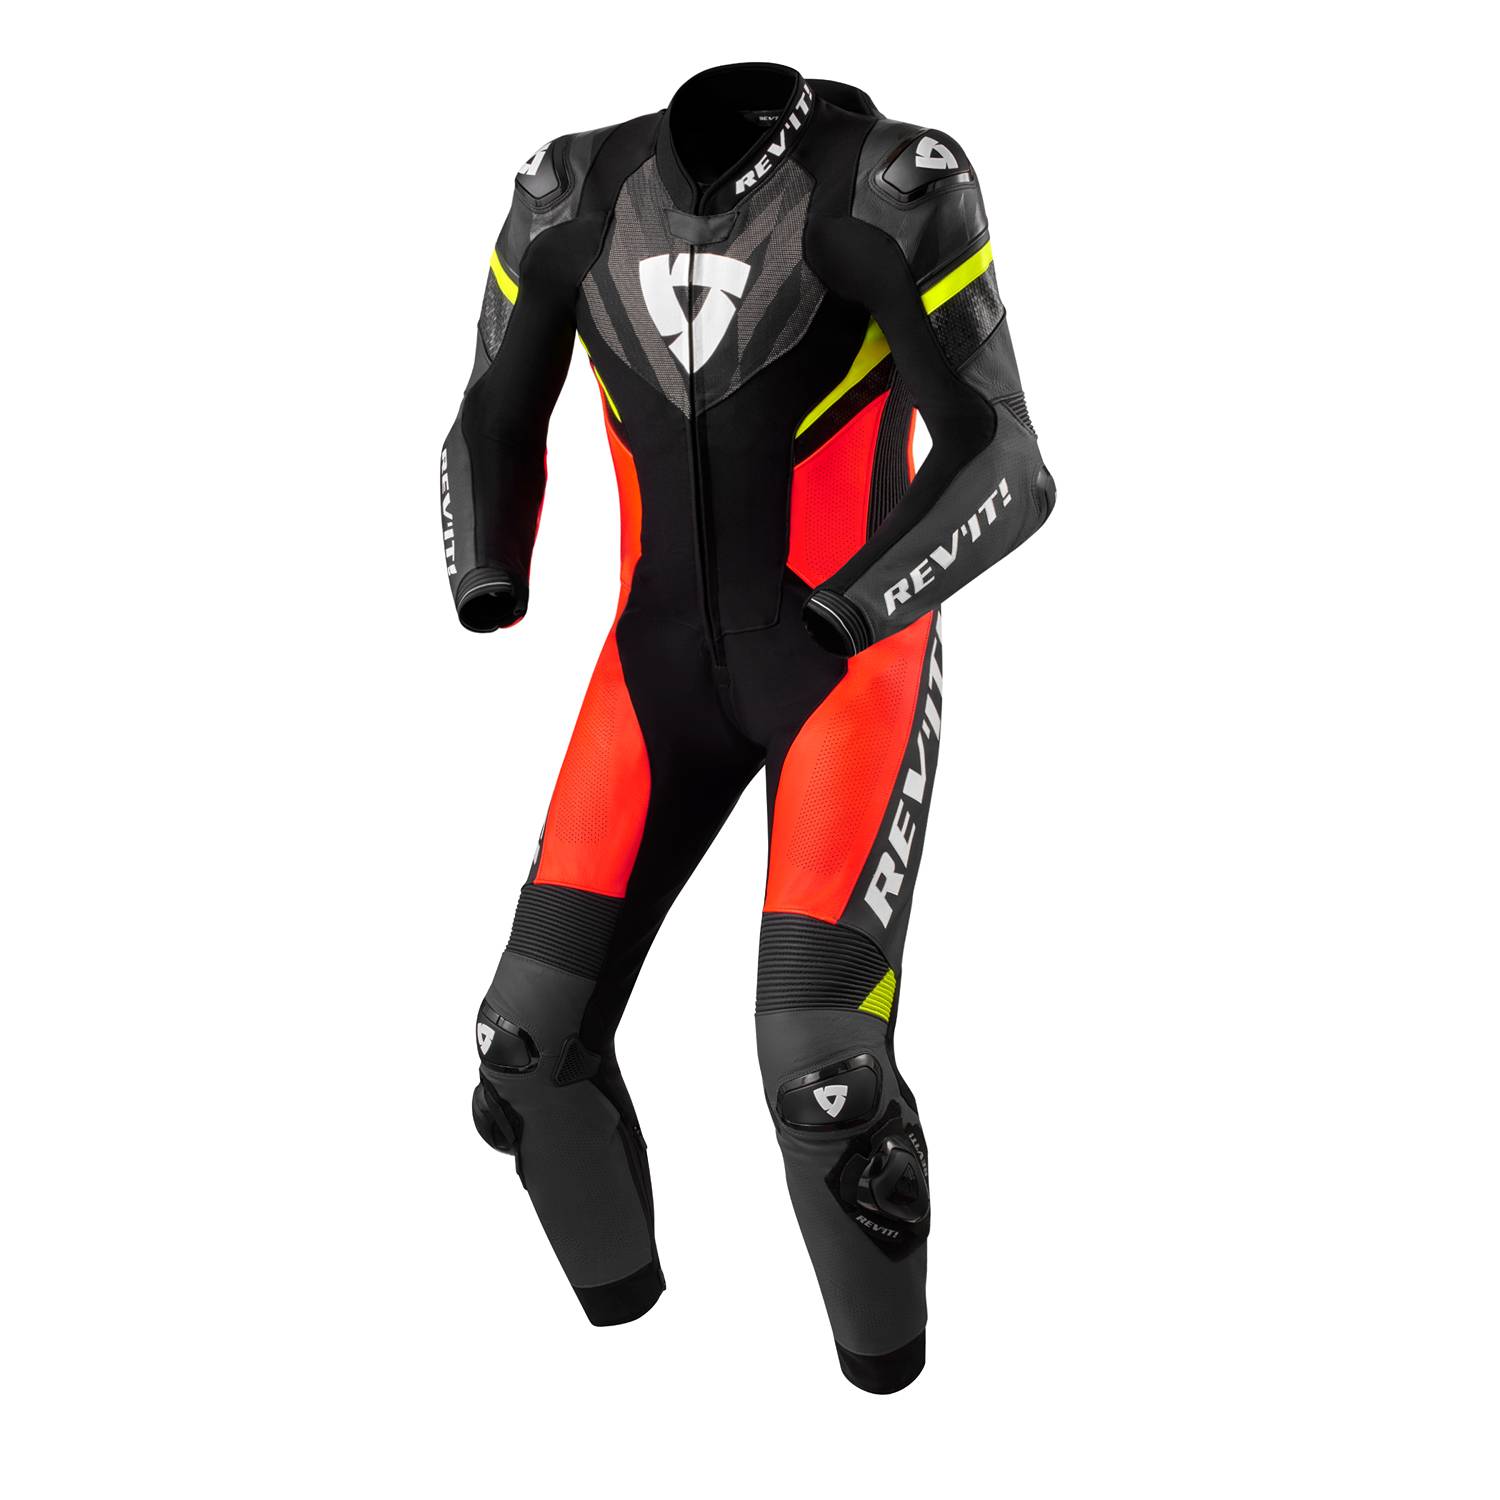 Image of REV'IT! Hyperspeed 2 One Piece Suit Black Neon Red Size 48 ID 8700001359788